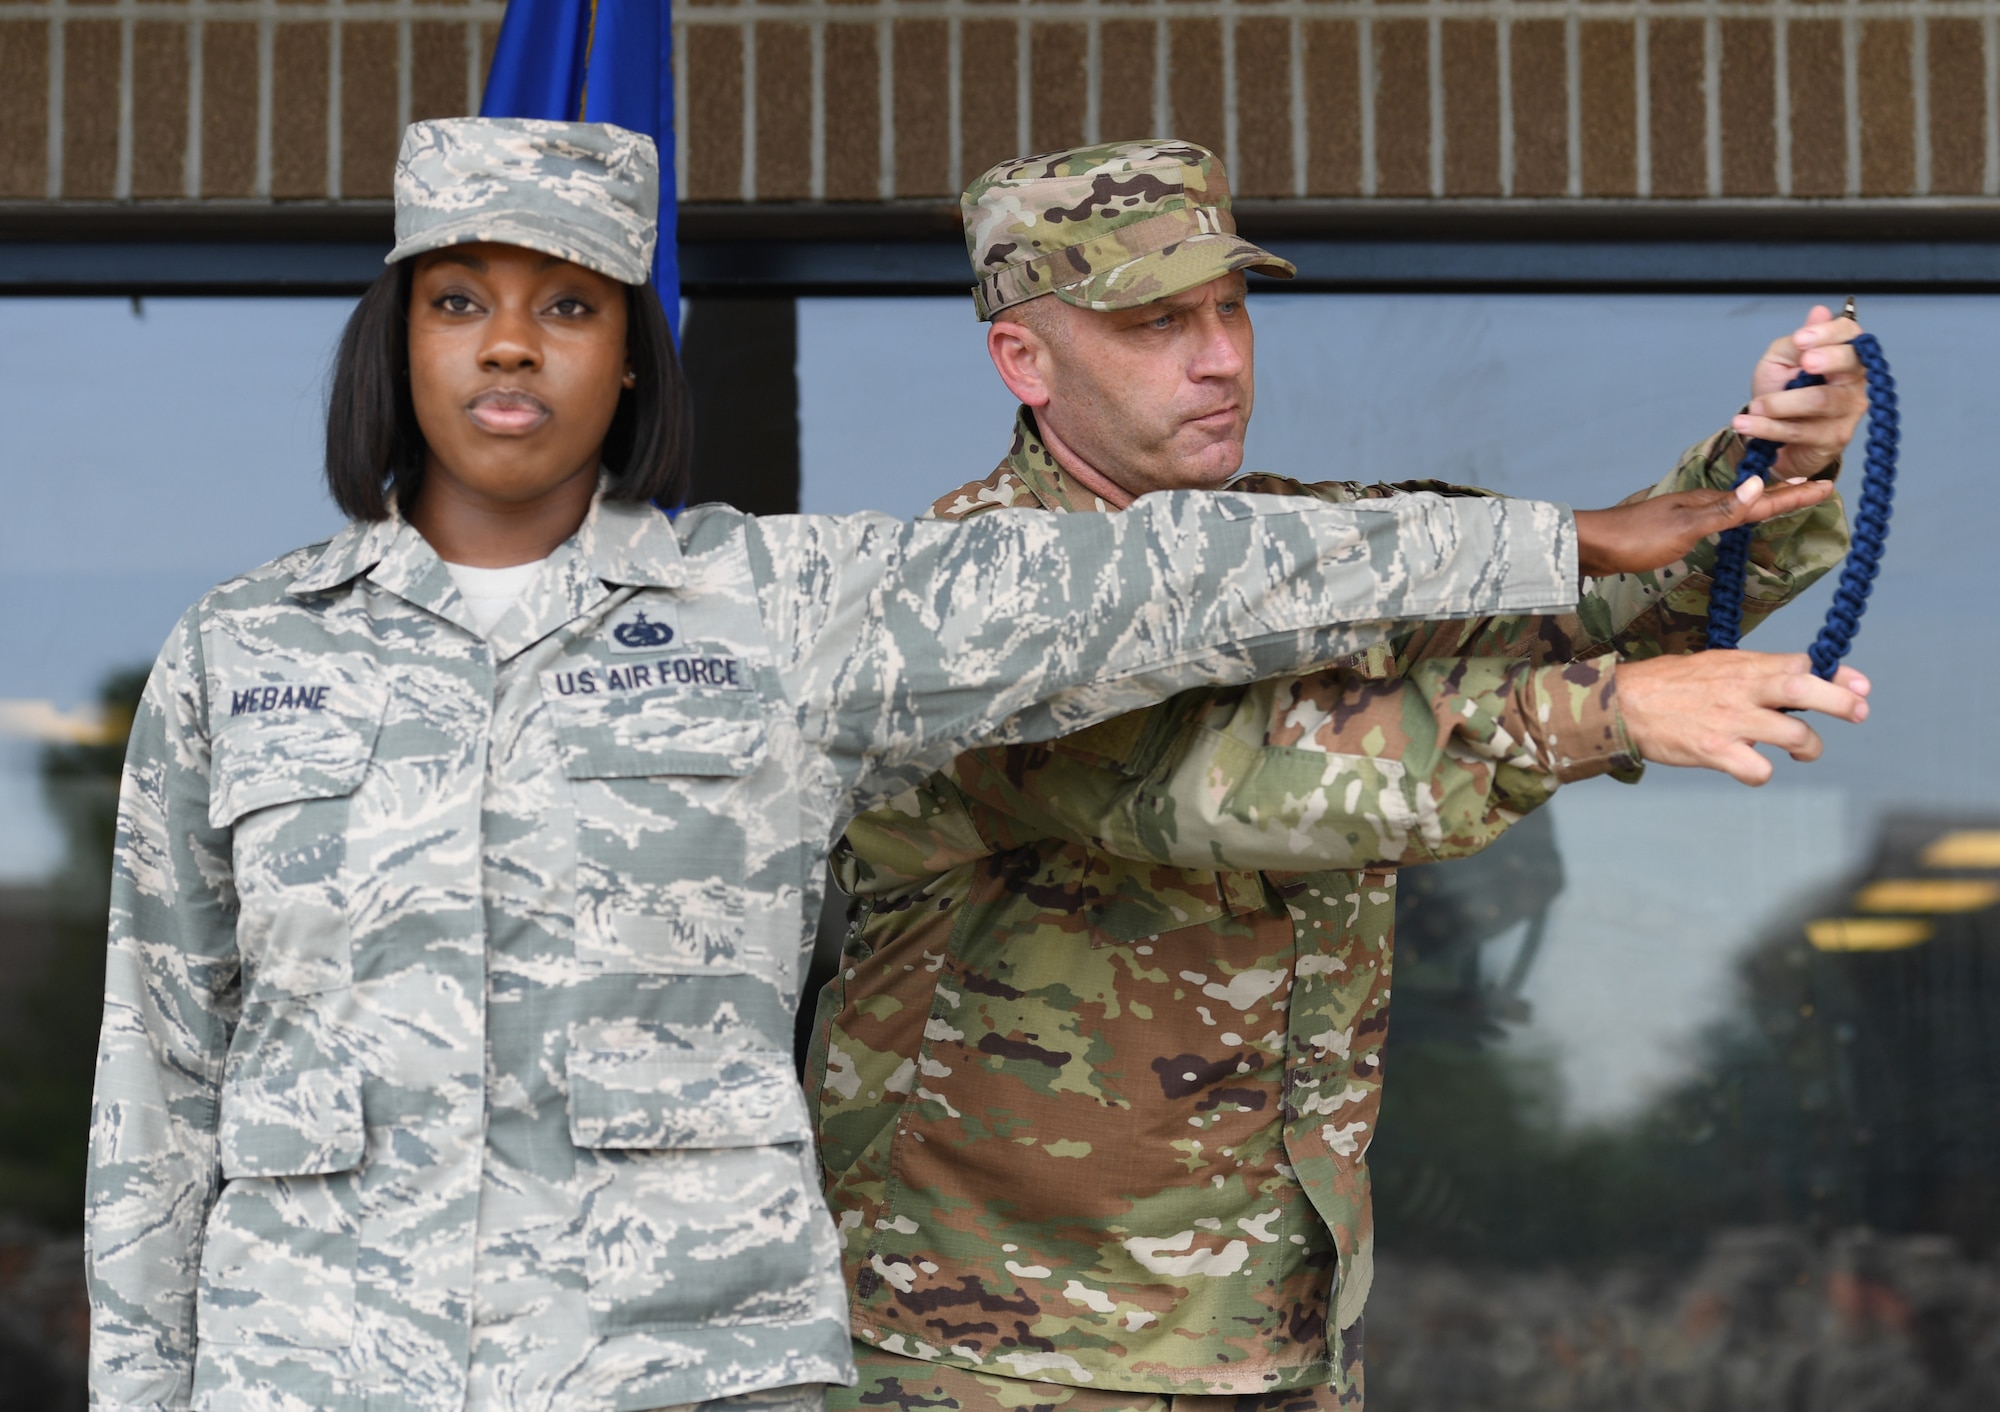 U.S. Air Force Chief Master Sgt. Anthony Fisher, 81st Training Group superintendent, presents a blue rope to Staff Sgt. Allison Mebane, 81st Training Support Squadron military training leader course student, during a MTL course graduation ceremony at the Levitow Training Support Facility on Keesler Air Force Base, Mississippi, May 30, 2019. The MTL course is responsible for training approximately 120 MTLs per year. Those MTLs are then responsible for training approximately 30,000 Airmen in 49 different locations that fall under Air Education and Training Command. (U.S. Air Force photo by Kemberly Groue)